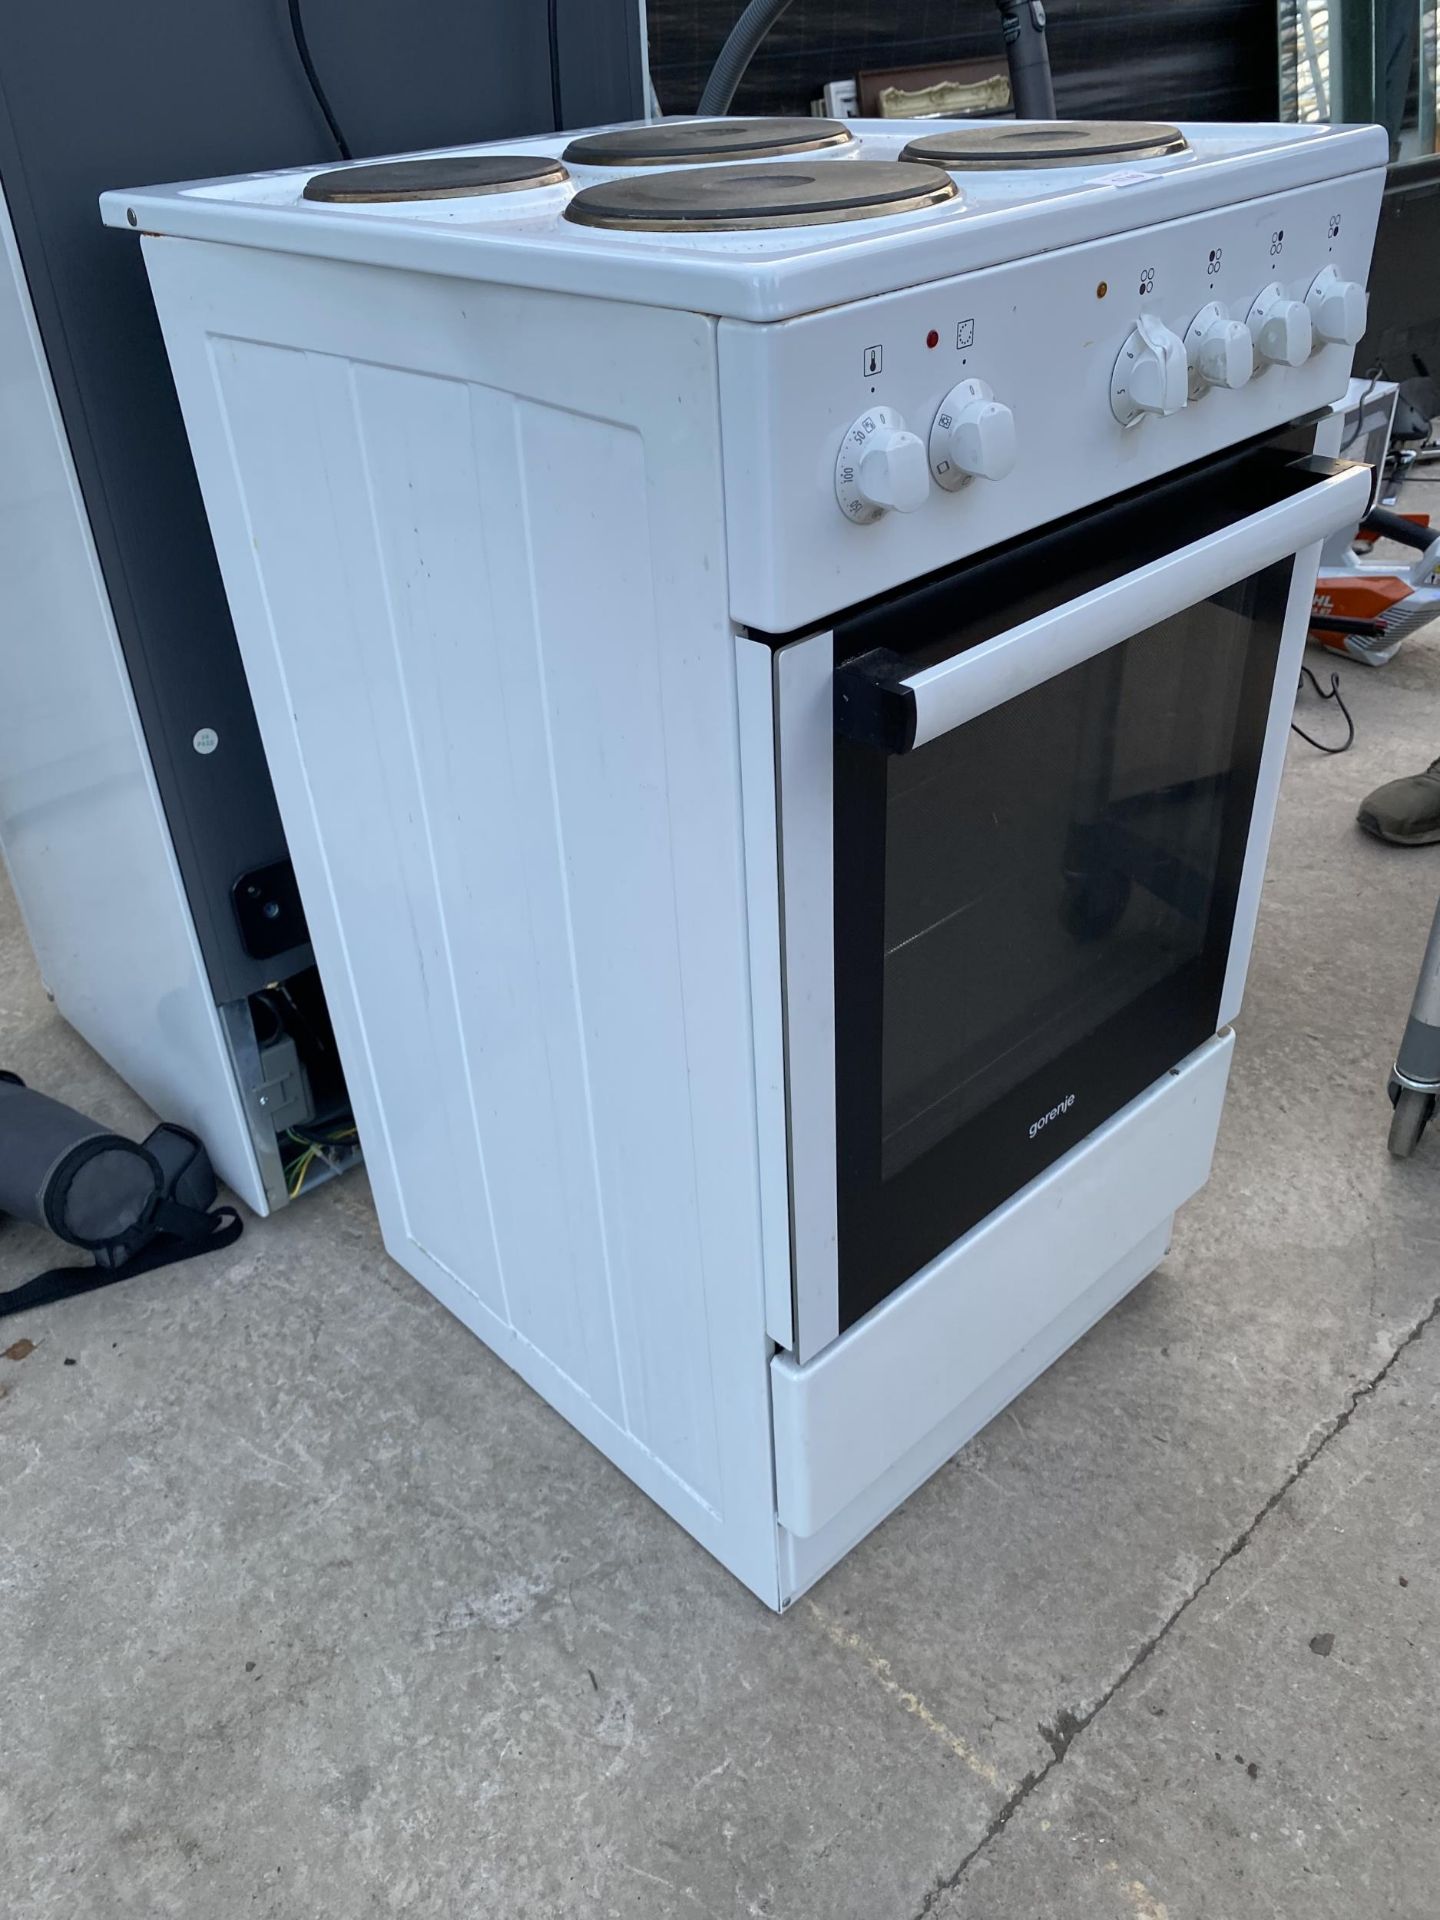 A WHITE GORENJE FREESTANDING ELECTRIC OVEN AND HOB - Image 2 of 3